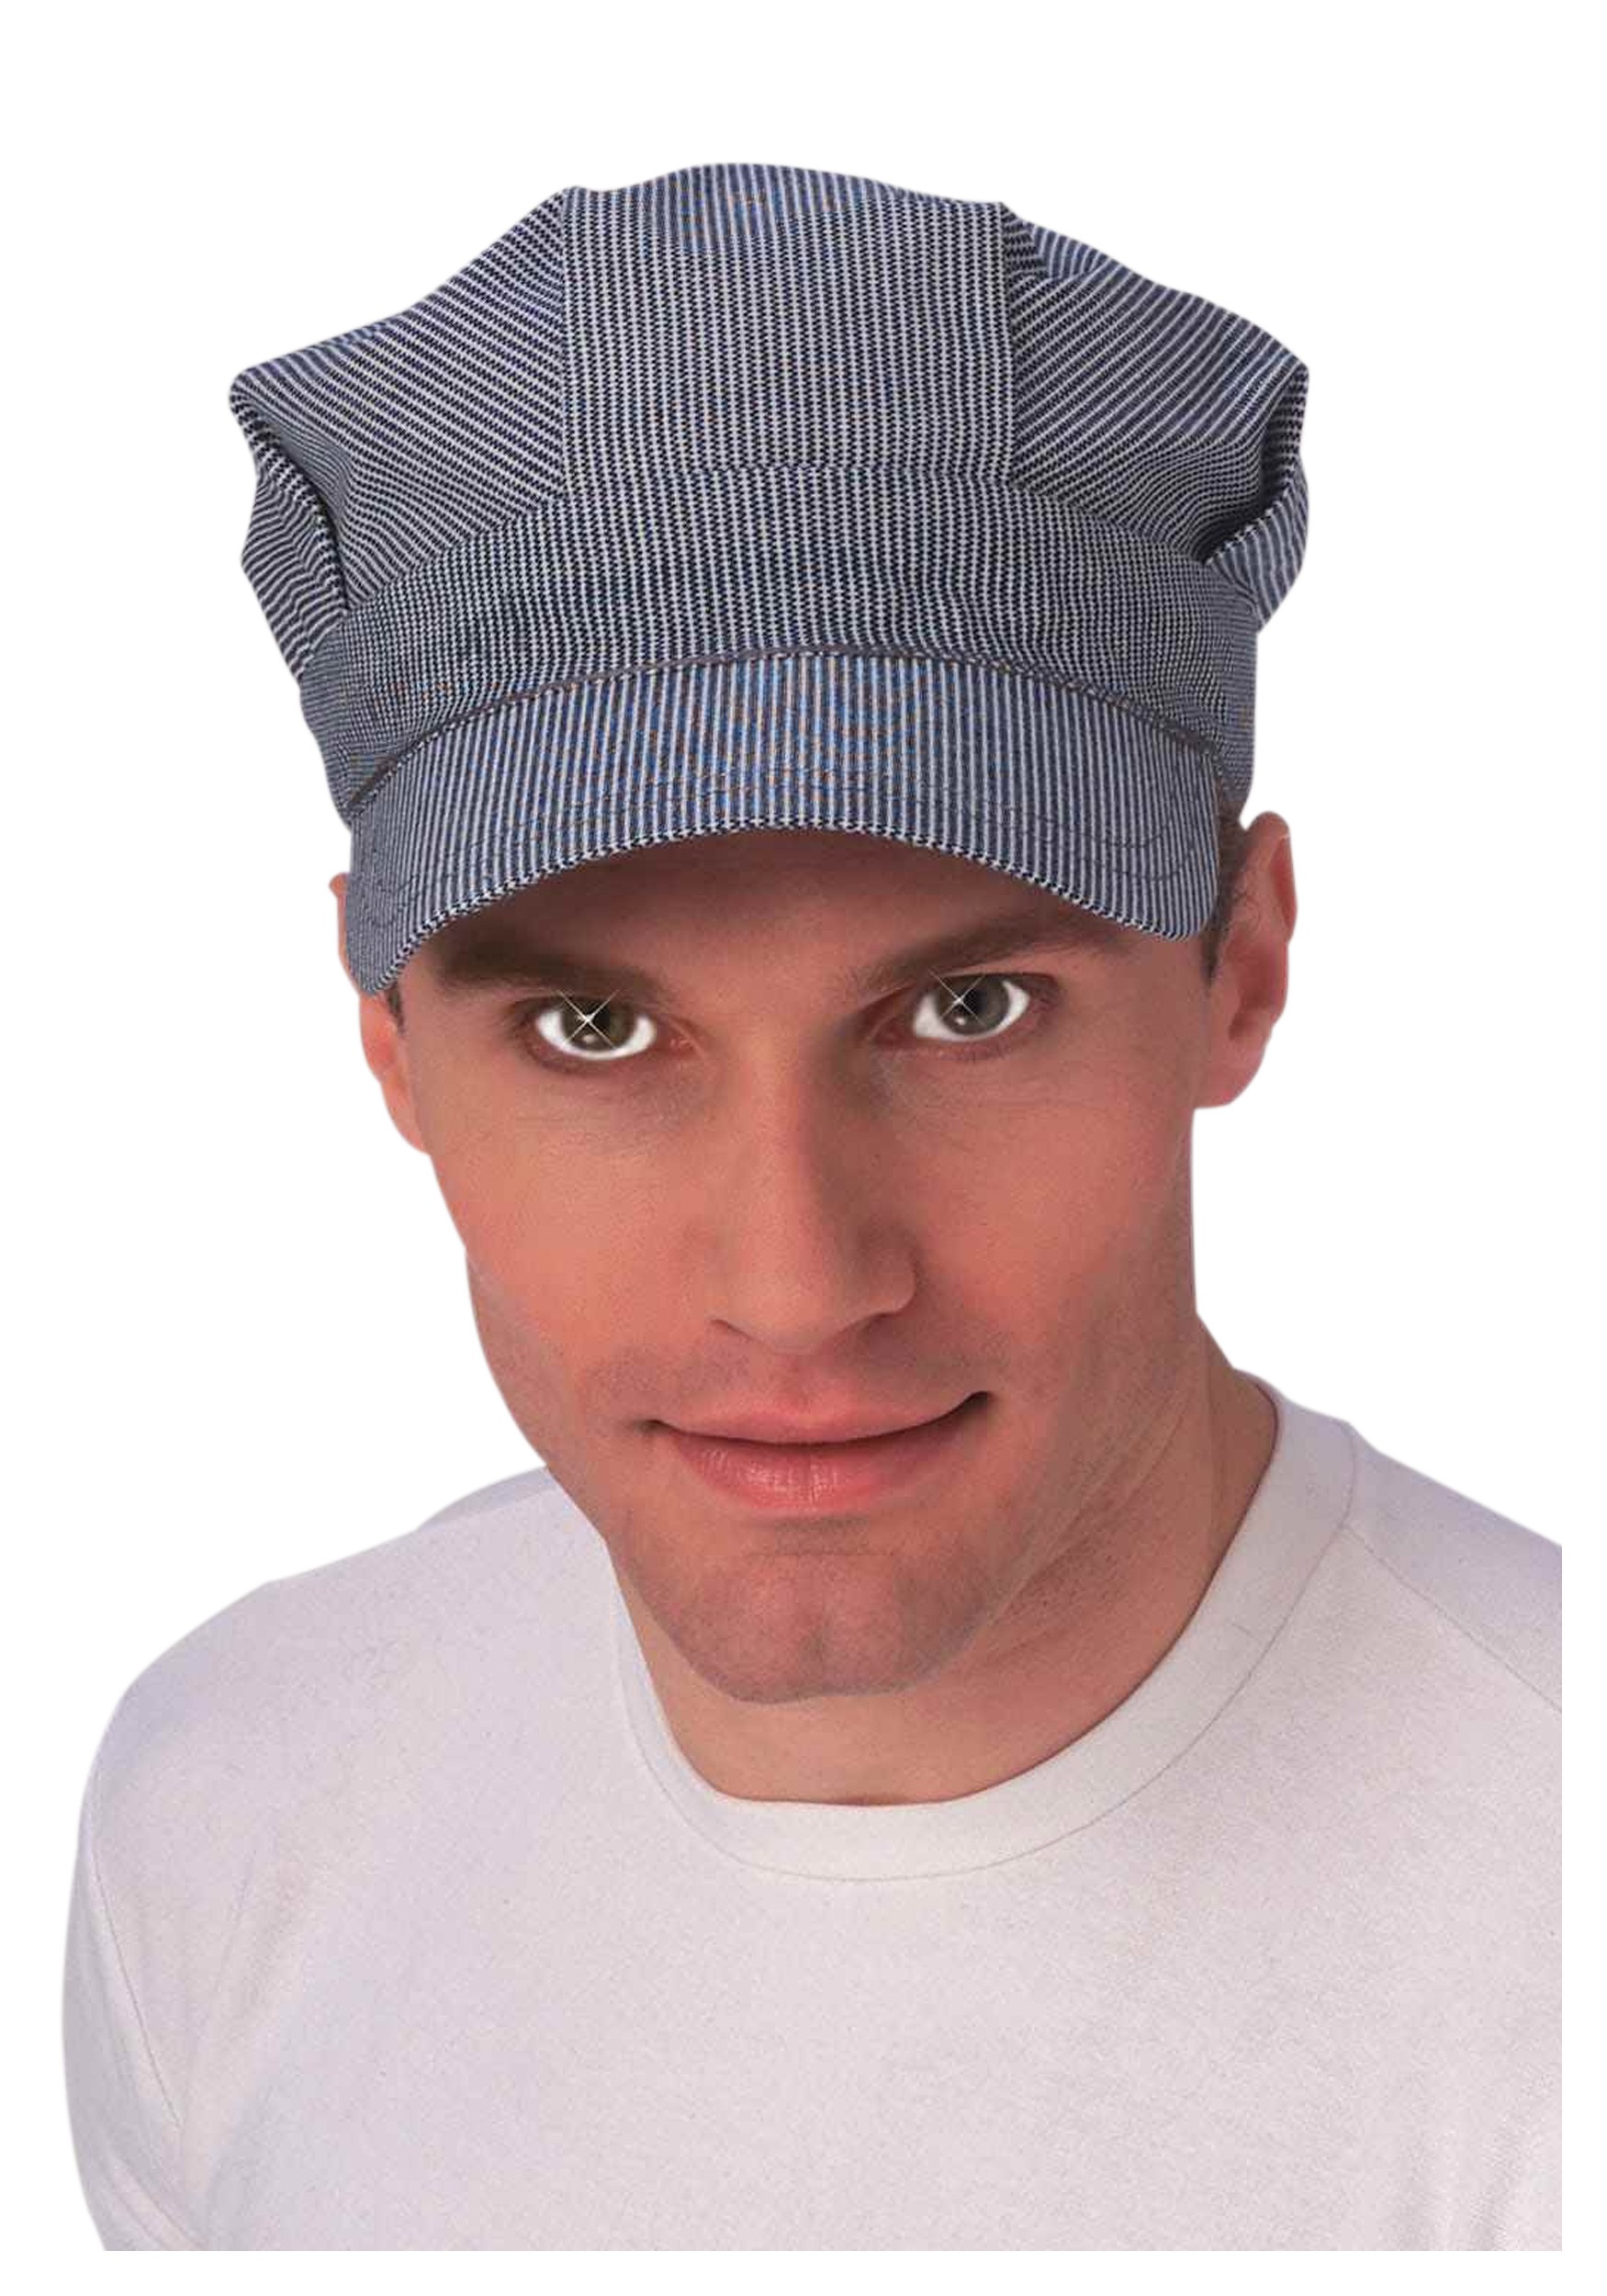 Train Engineer Costume Hat for Adults